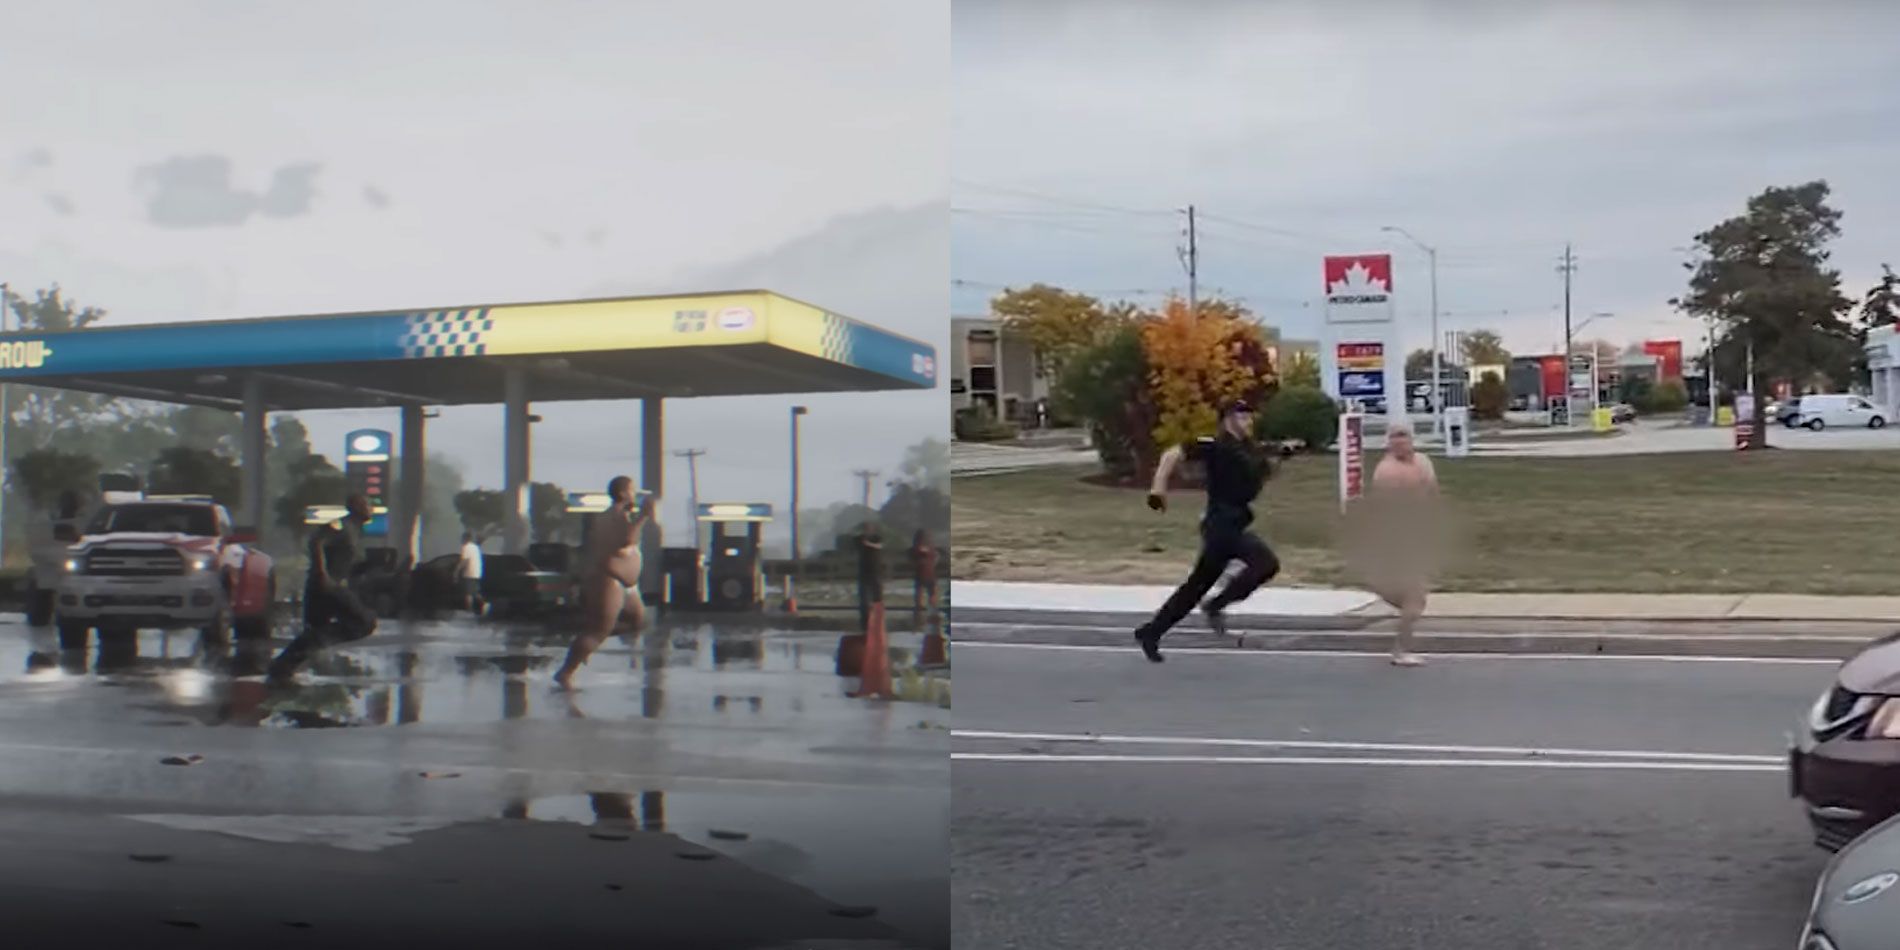 Police officer chasing down a man from the GTA trailer. 